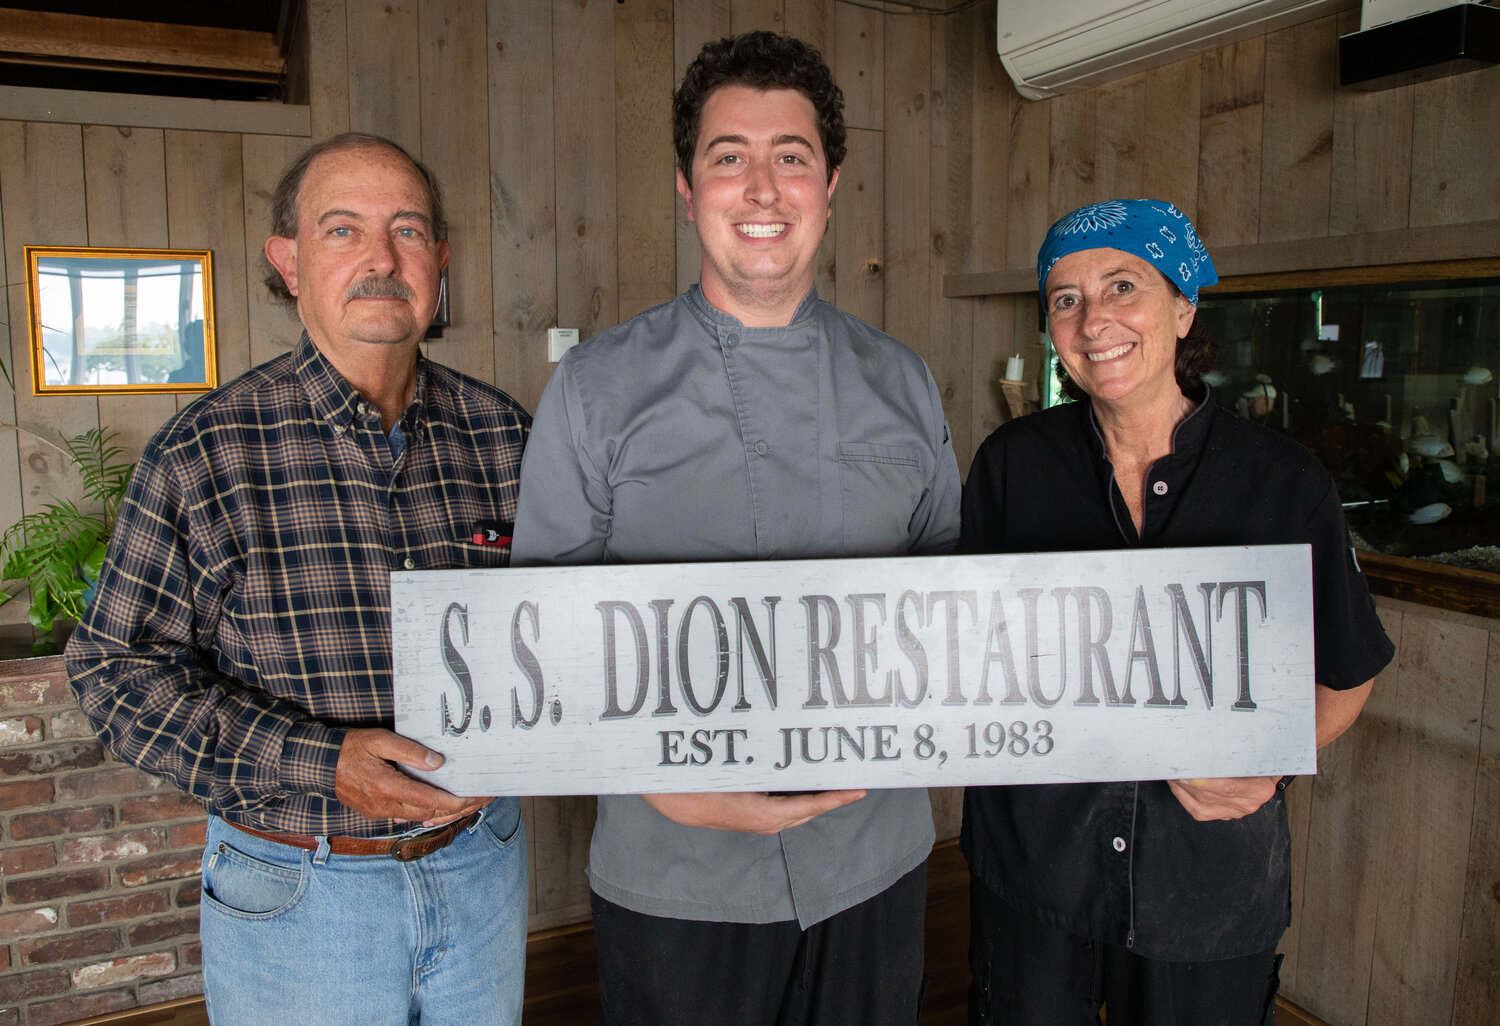 Steve and Sue Dion, left and right, with their son, Nic, are celebrating 40 years at S.S. Dion.